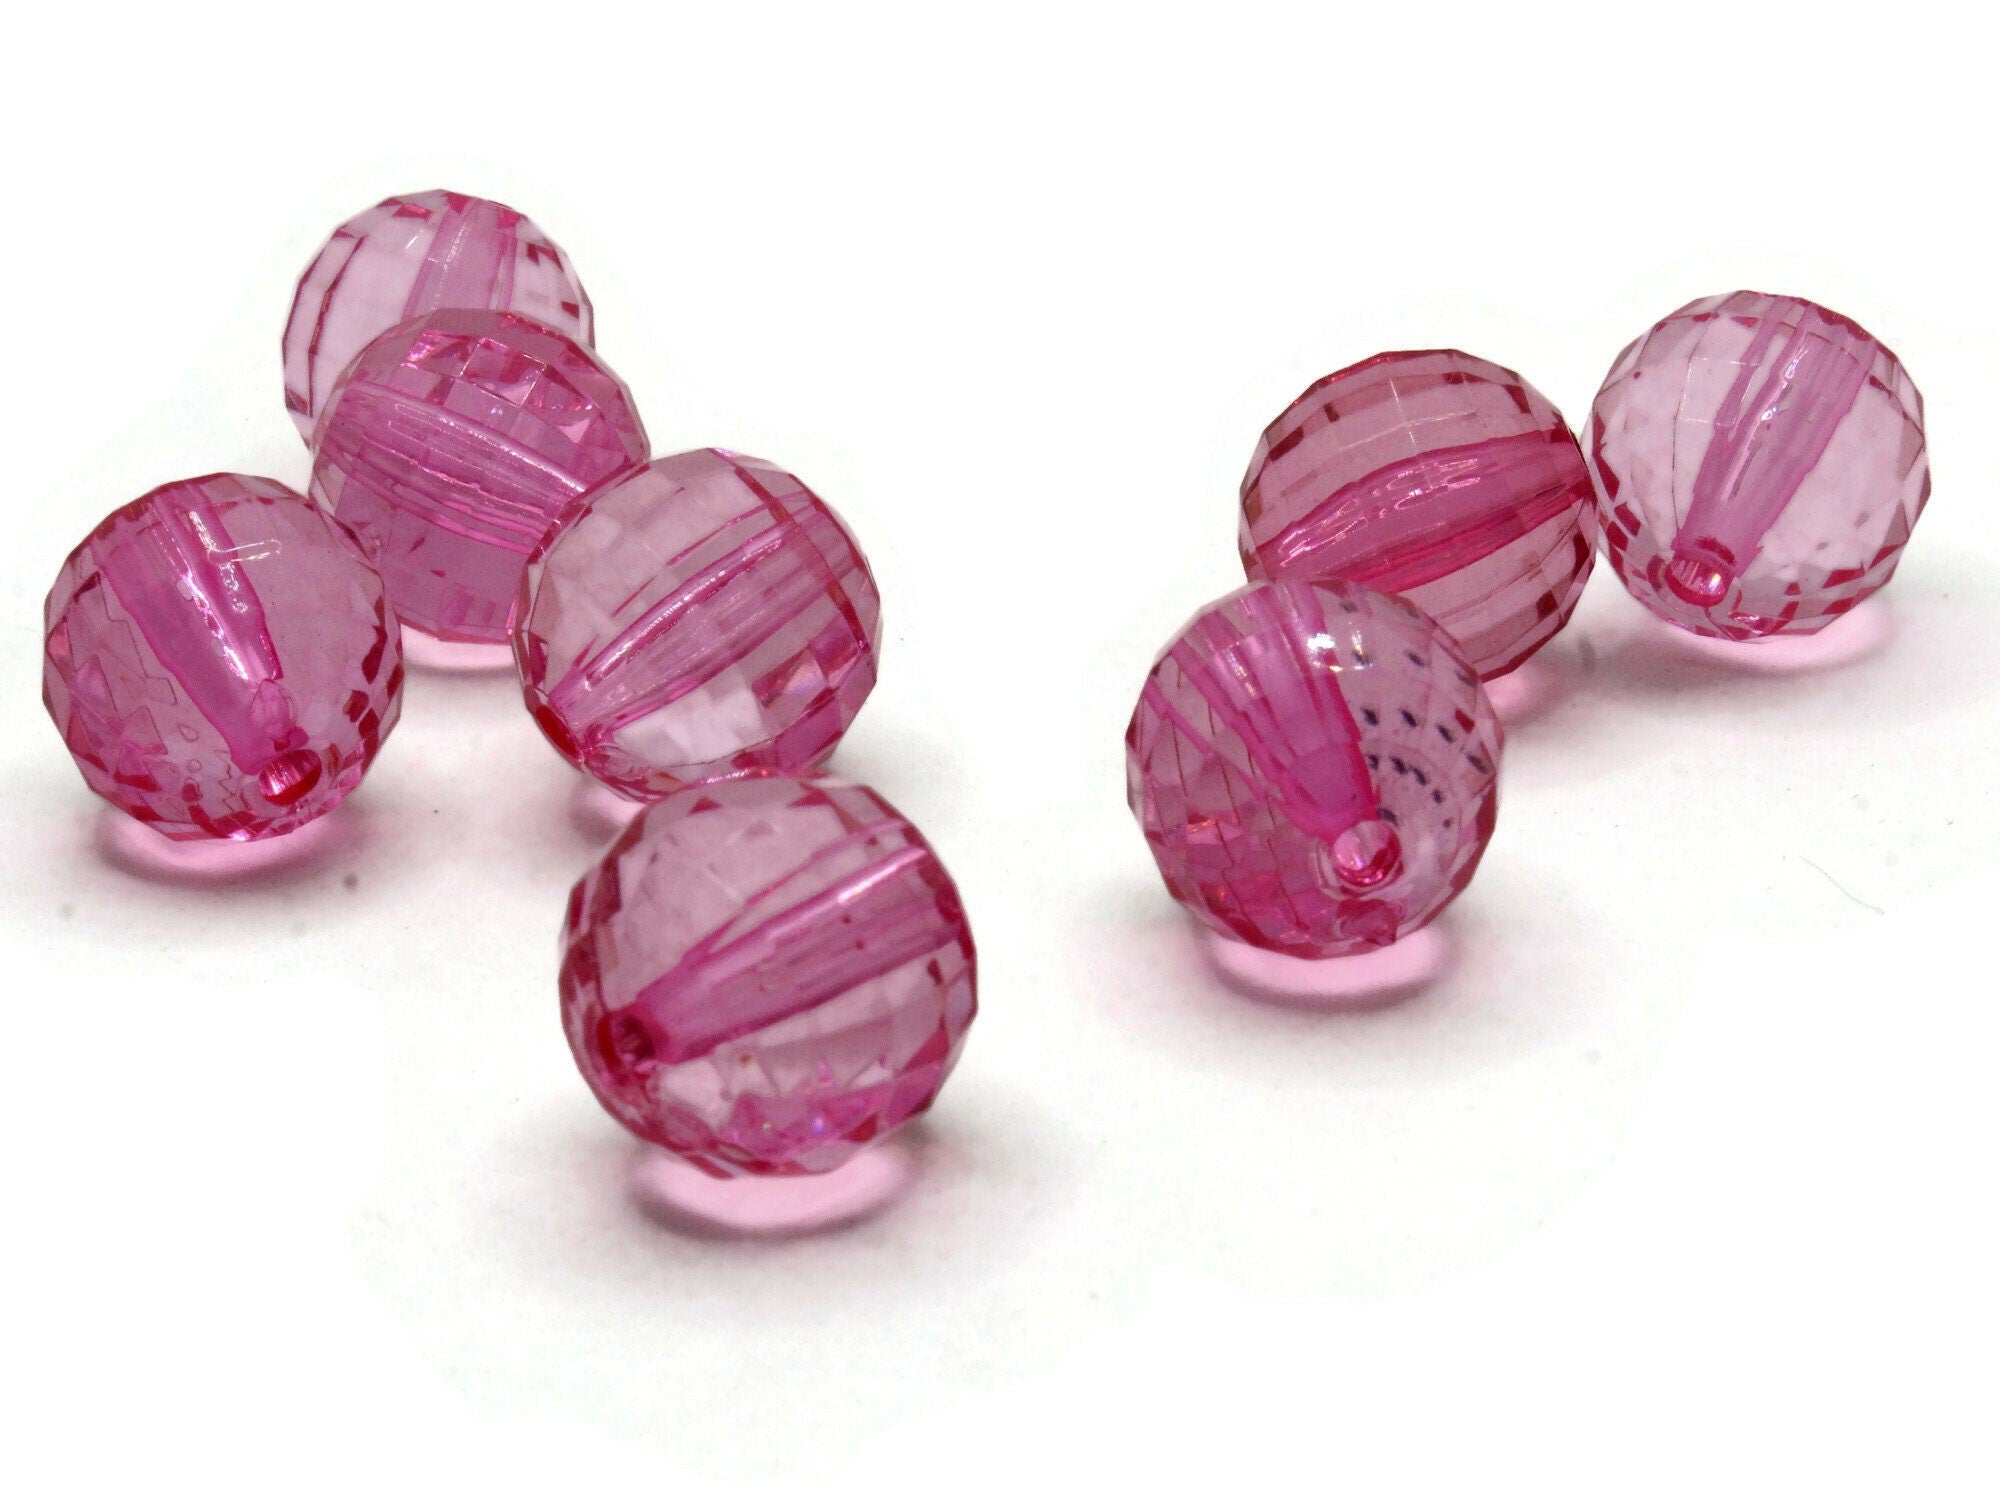 Large Pink Lucite Flower Beads, Plastic Acrylic Bead Caps, 30mm, Pack of 10  Light Pink Beads for Jewelry Making 